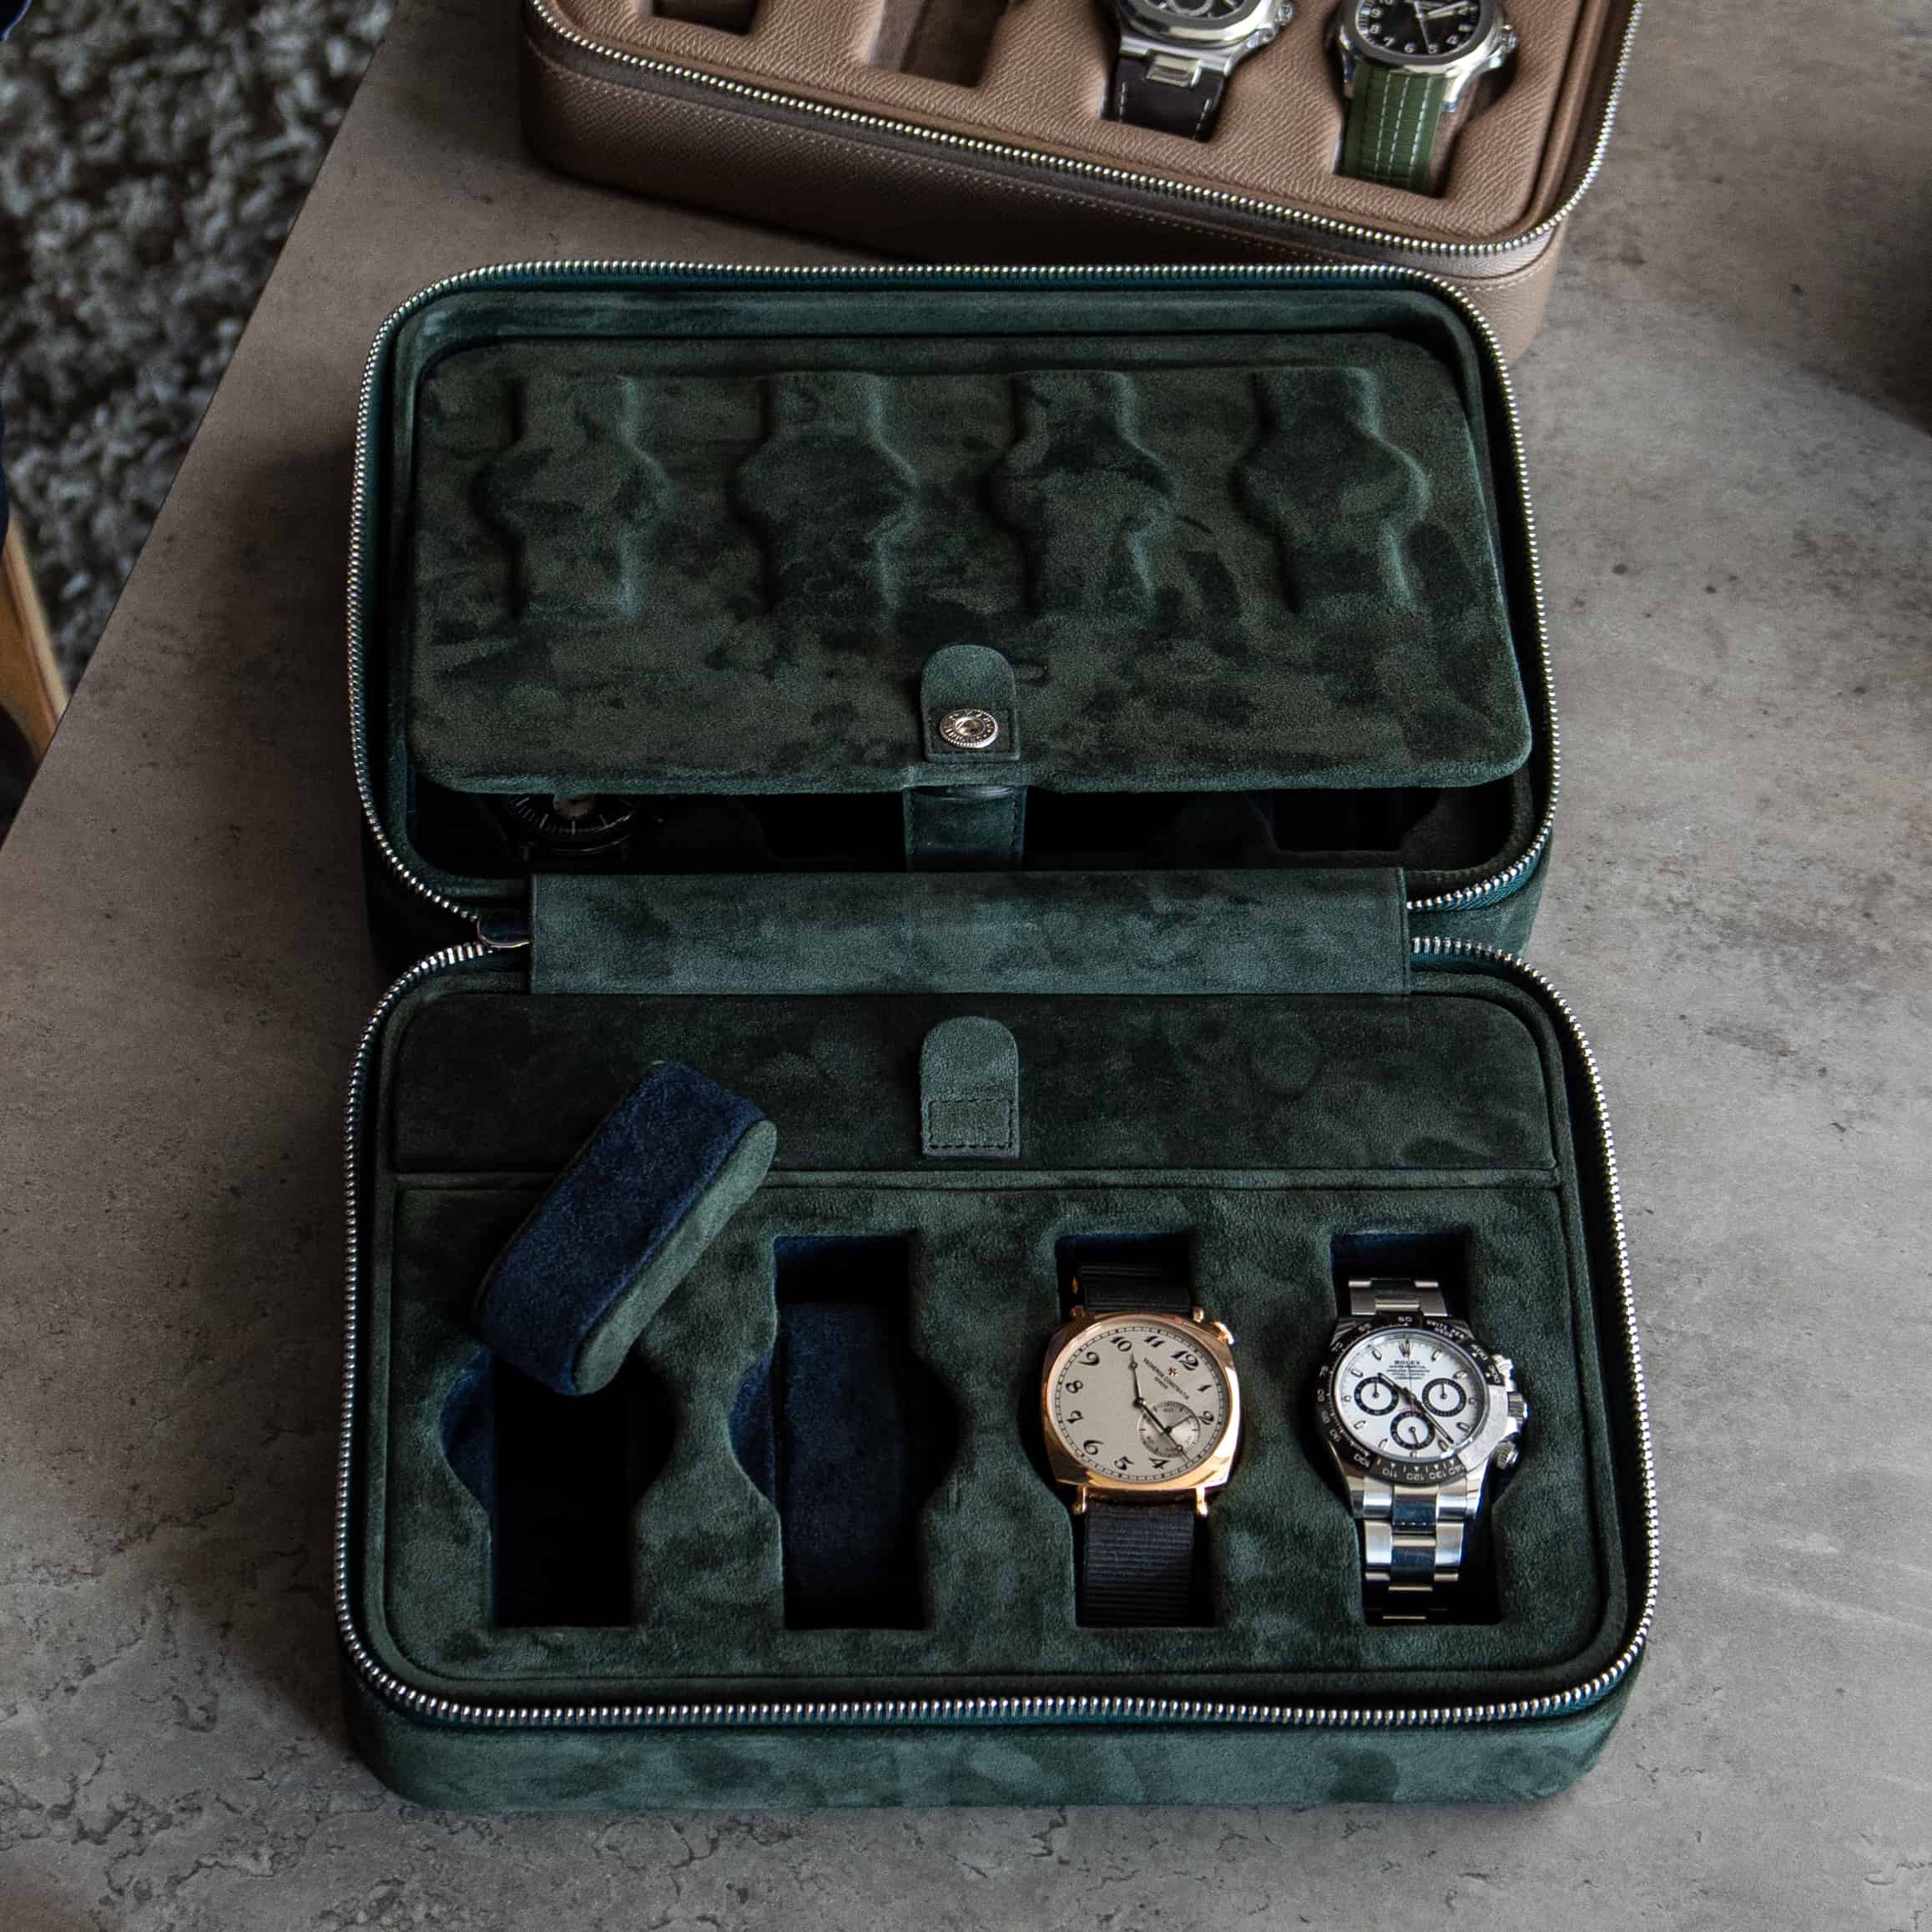 Forest Green 8 Slot Watch Box - €895 - Free shipping